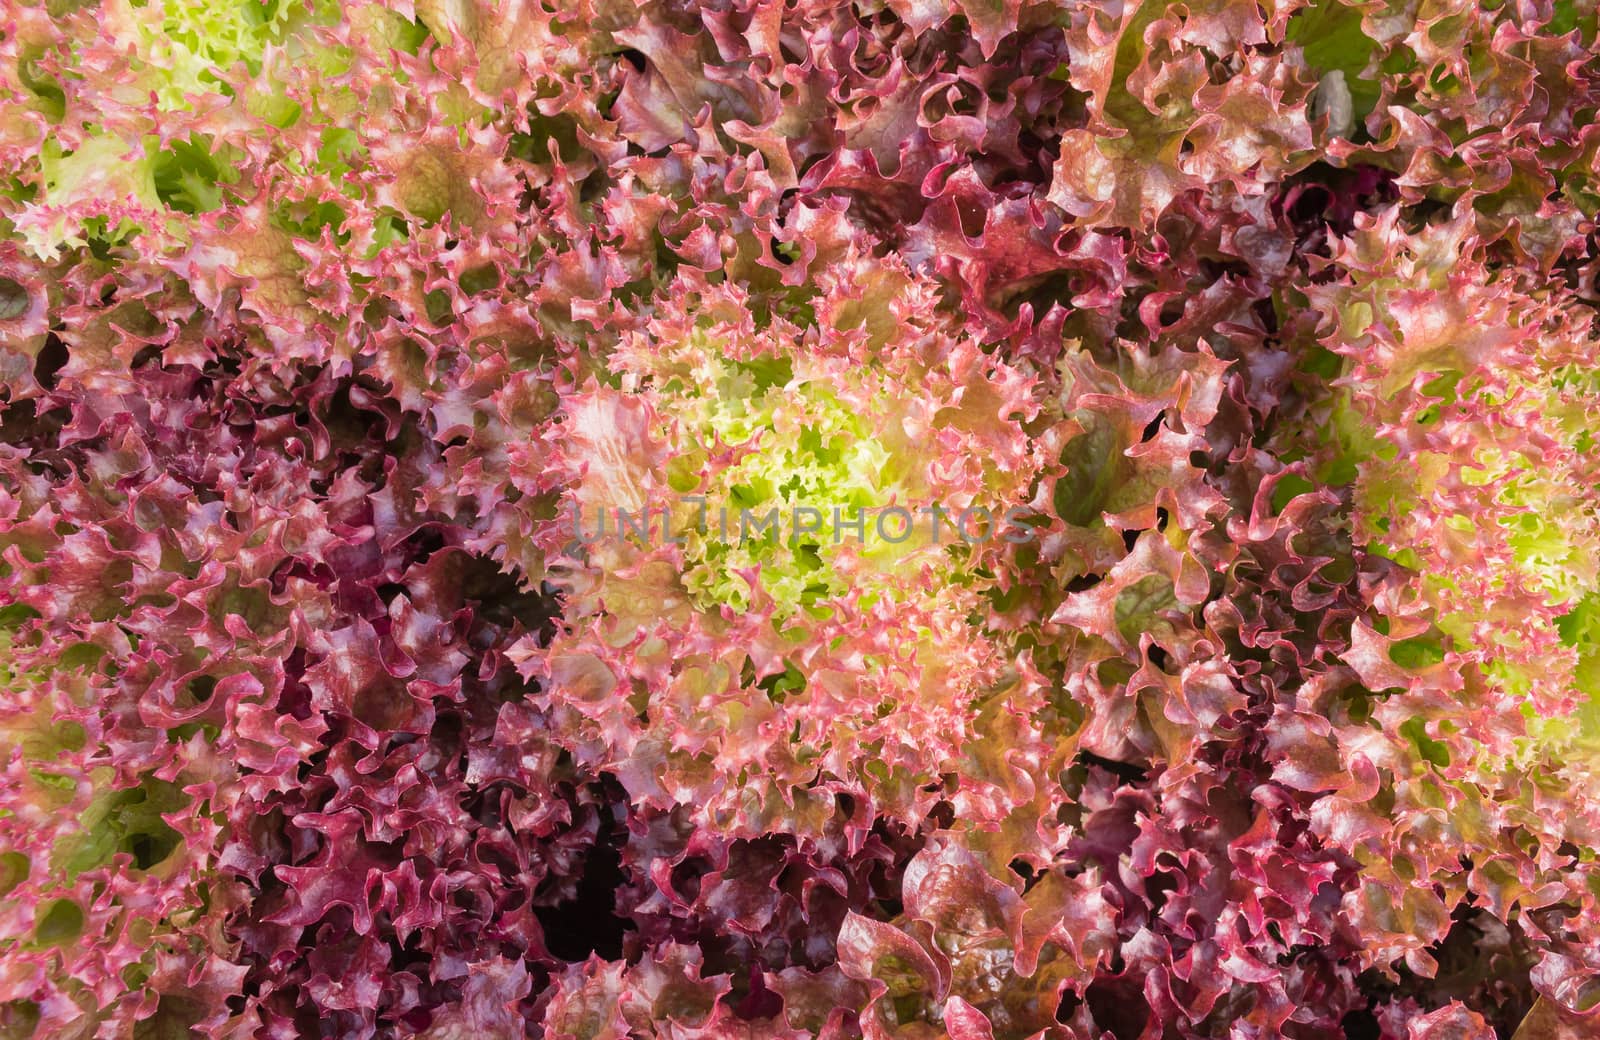 Red leaf lettuce or red coral in garden. Fresh red leaf lettuce or red coral texture. Red leaf lettuce or red coral for health. Vegetarian food red leaf 
lettuce or red coral.